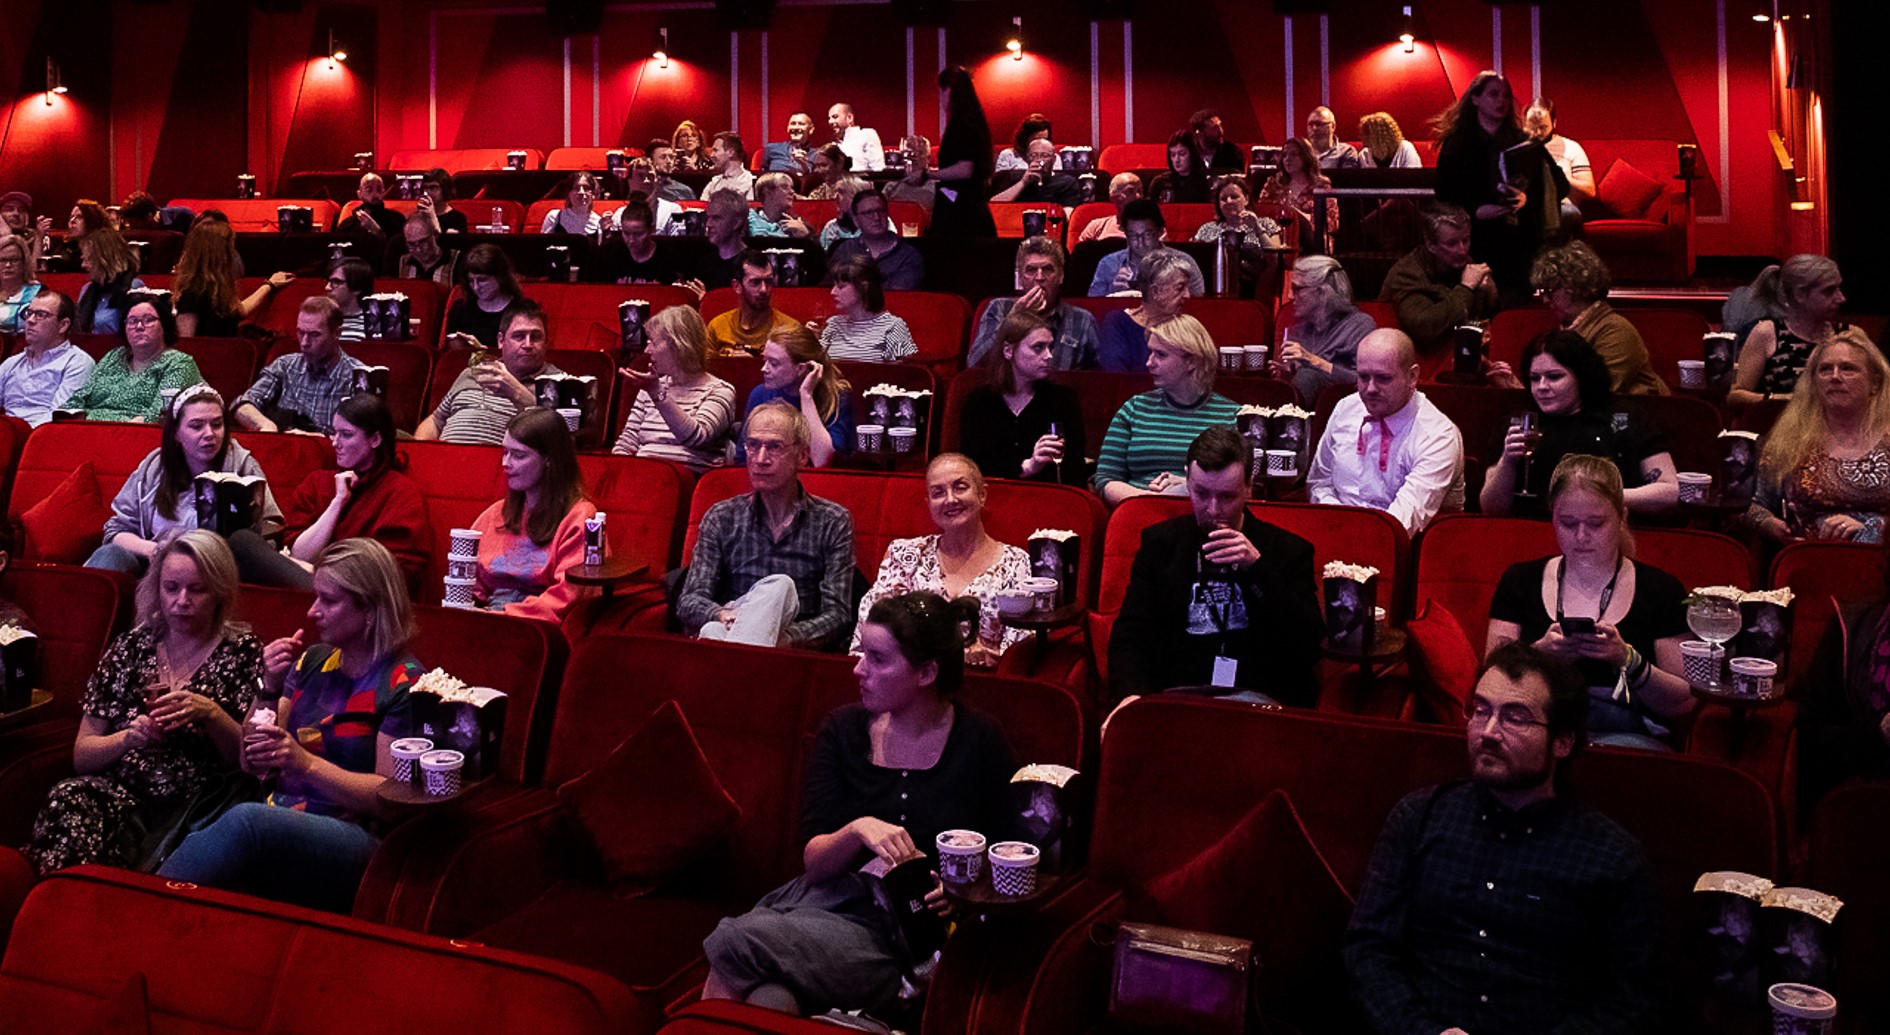 the image shows the inside of a cinema screen at the Edinburgh Filmhouse Cinema, with rows of red cinema seating filled with people looking forward to a screening